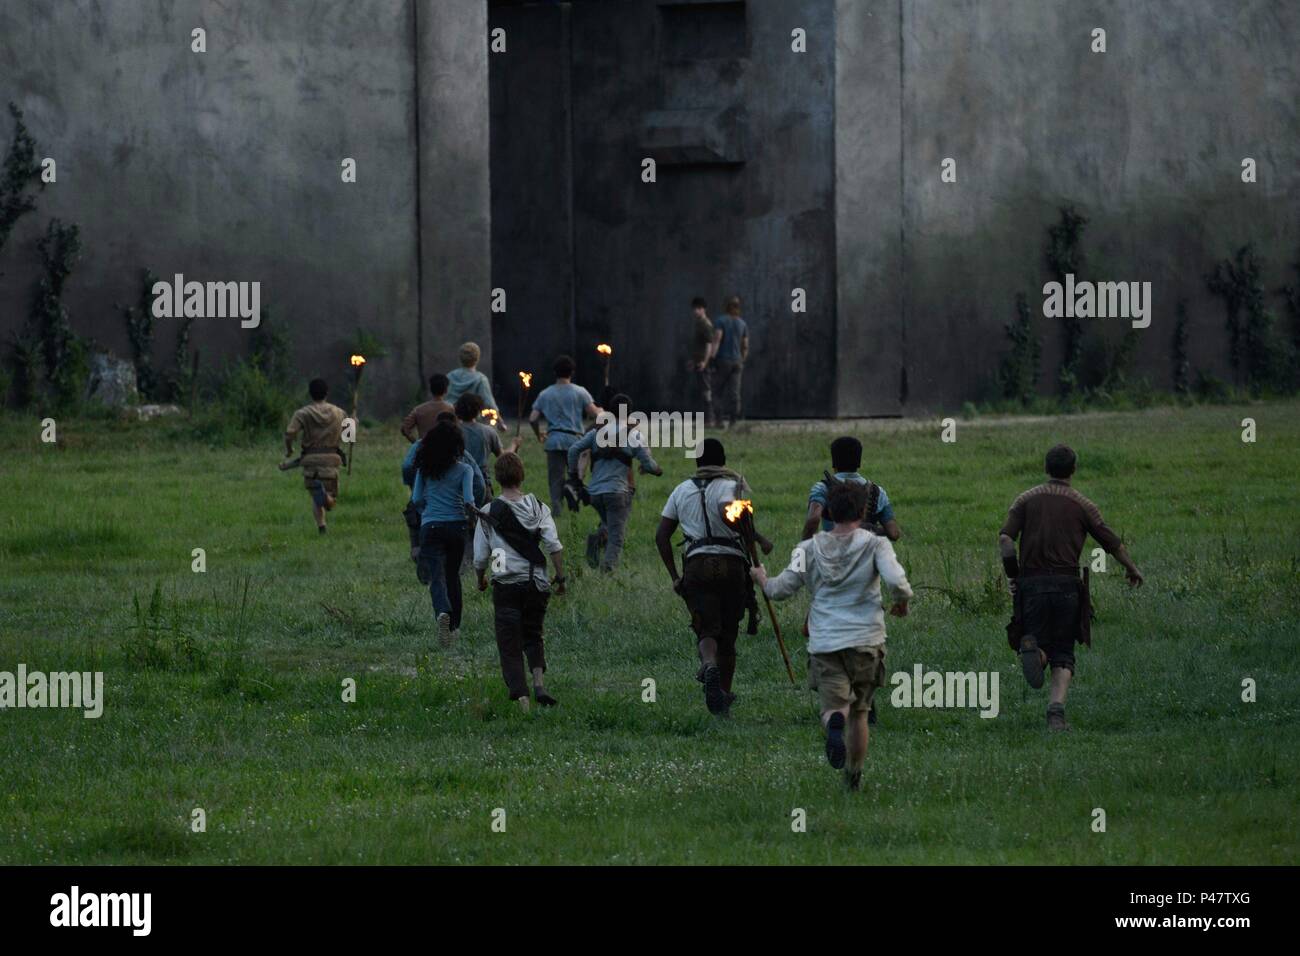 The Maze Runner 2014, directed by Wes Ball